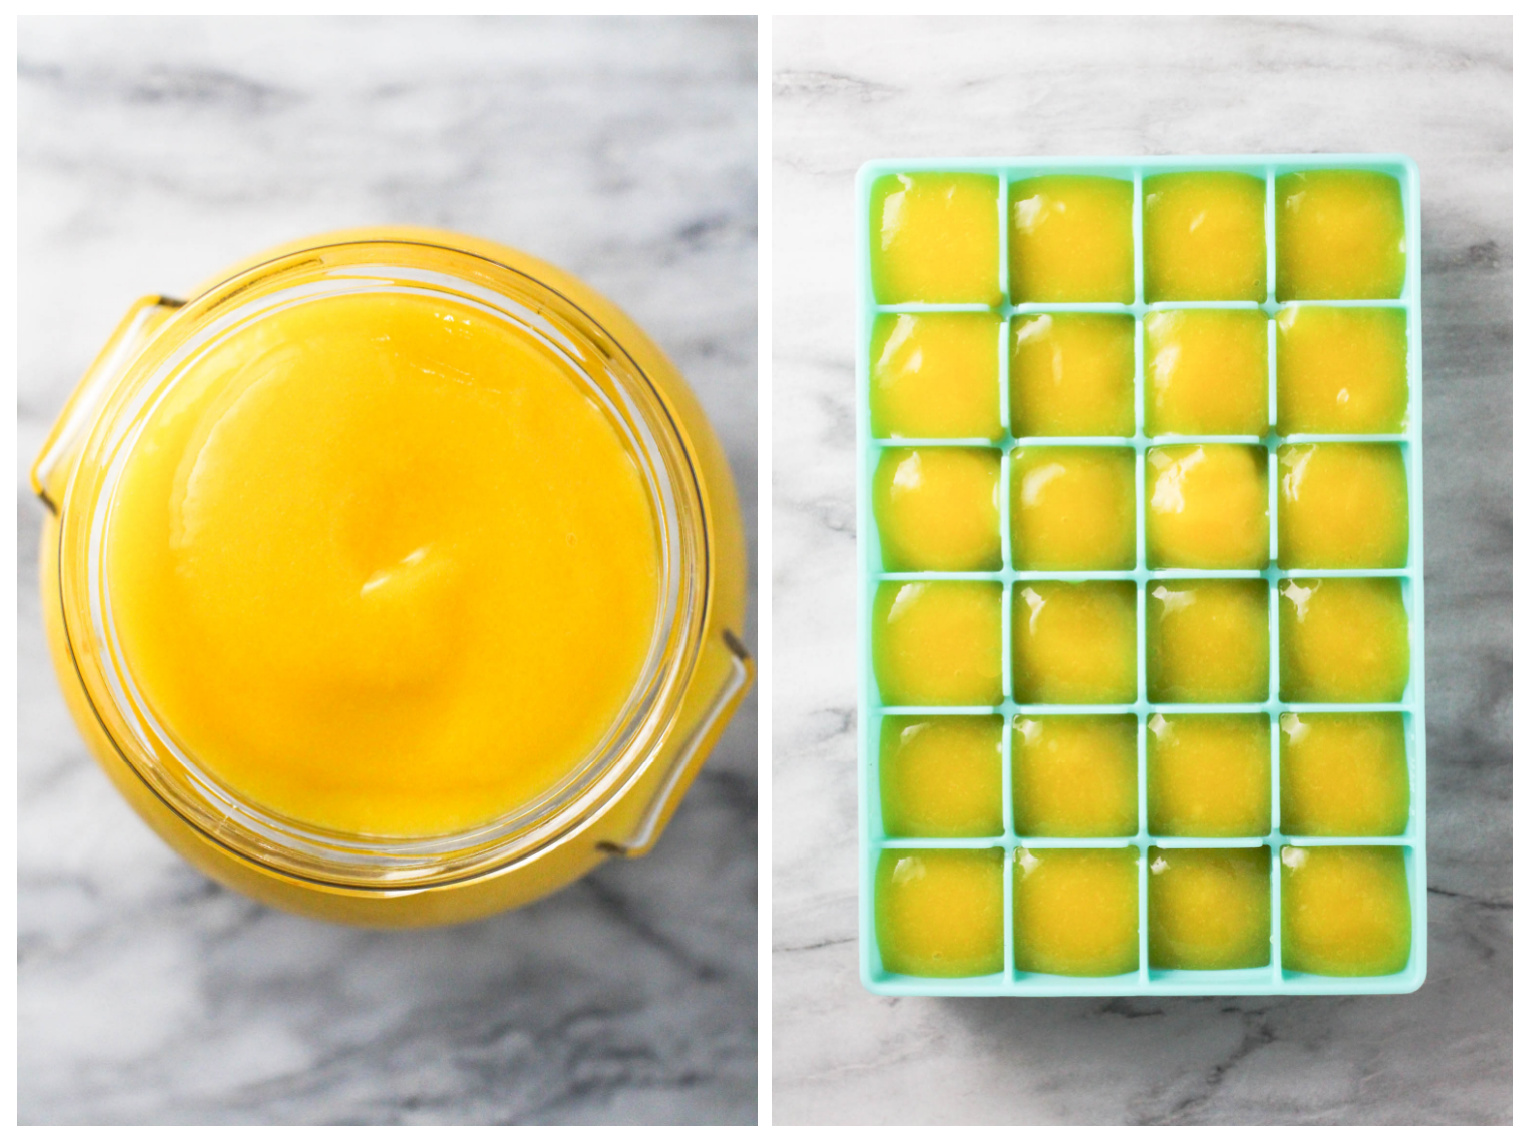 Two images side by side. Image on the left: mango puree in a glass jar. Image on the right: mango puree in a silicon ice tray.